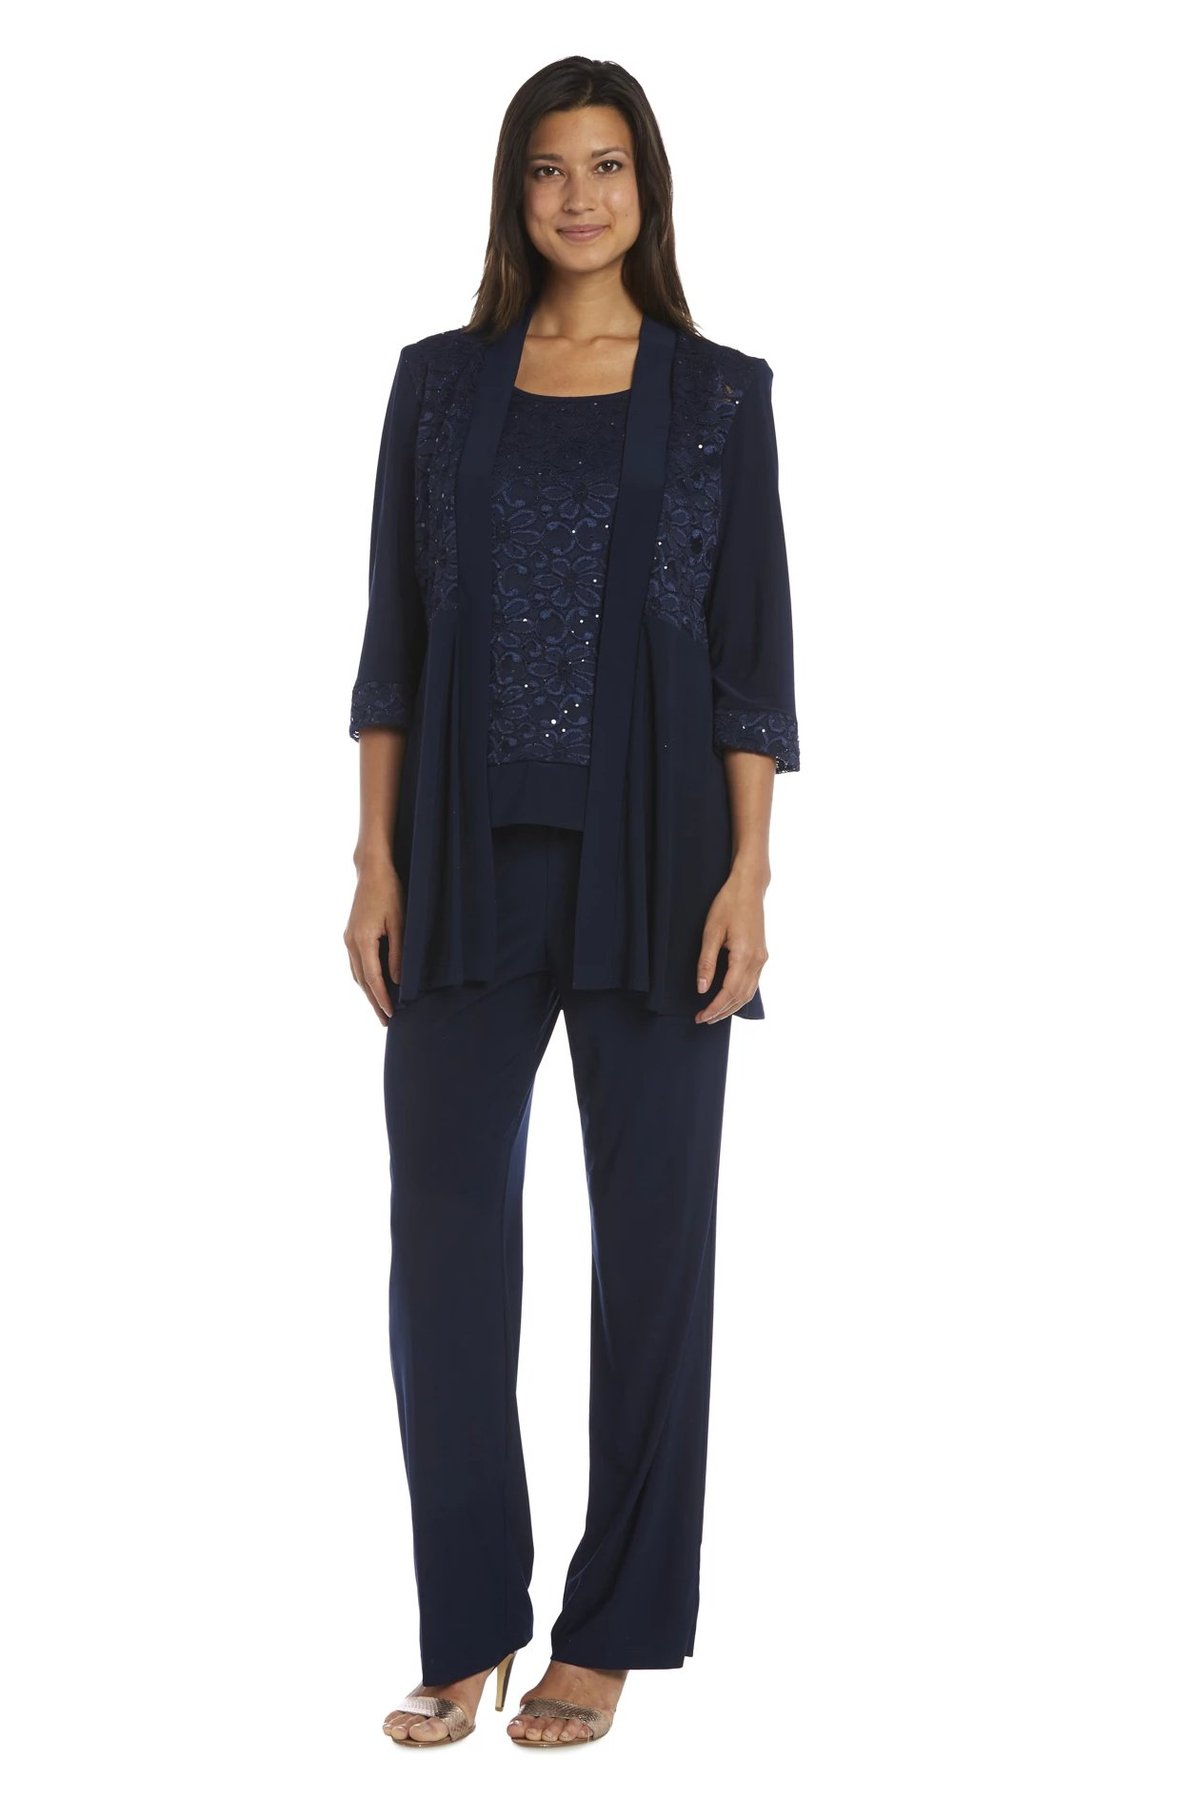 R&M Richards Women's Lace ITY 2 Piece Pant Suit - Mother of the bride outfit, 6 Navy - image 1 of 2